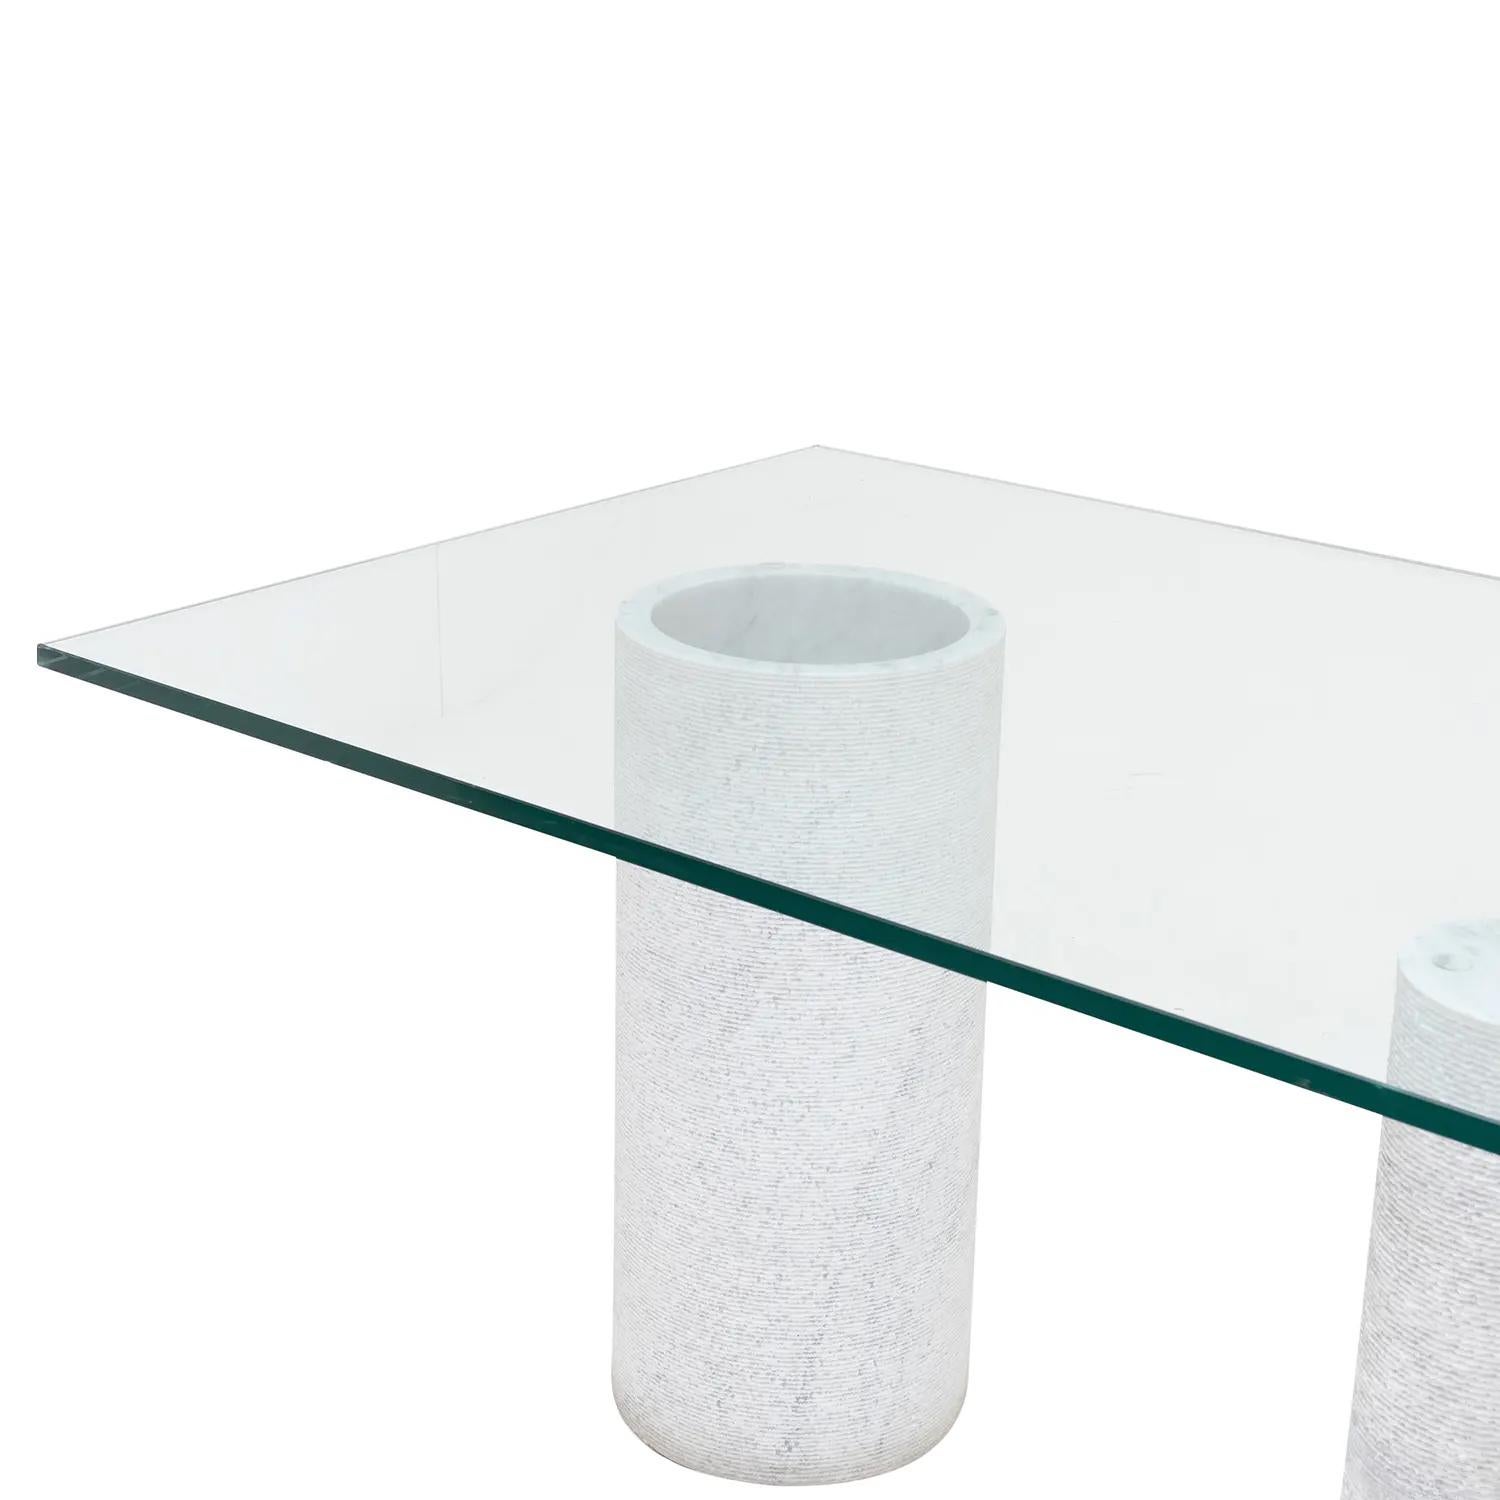 20th Century White Italian Marble, Glass Dining Room Table by Massimo Vignelli For Sale 6